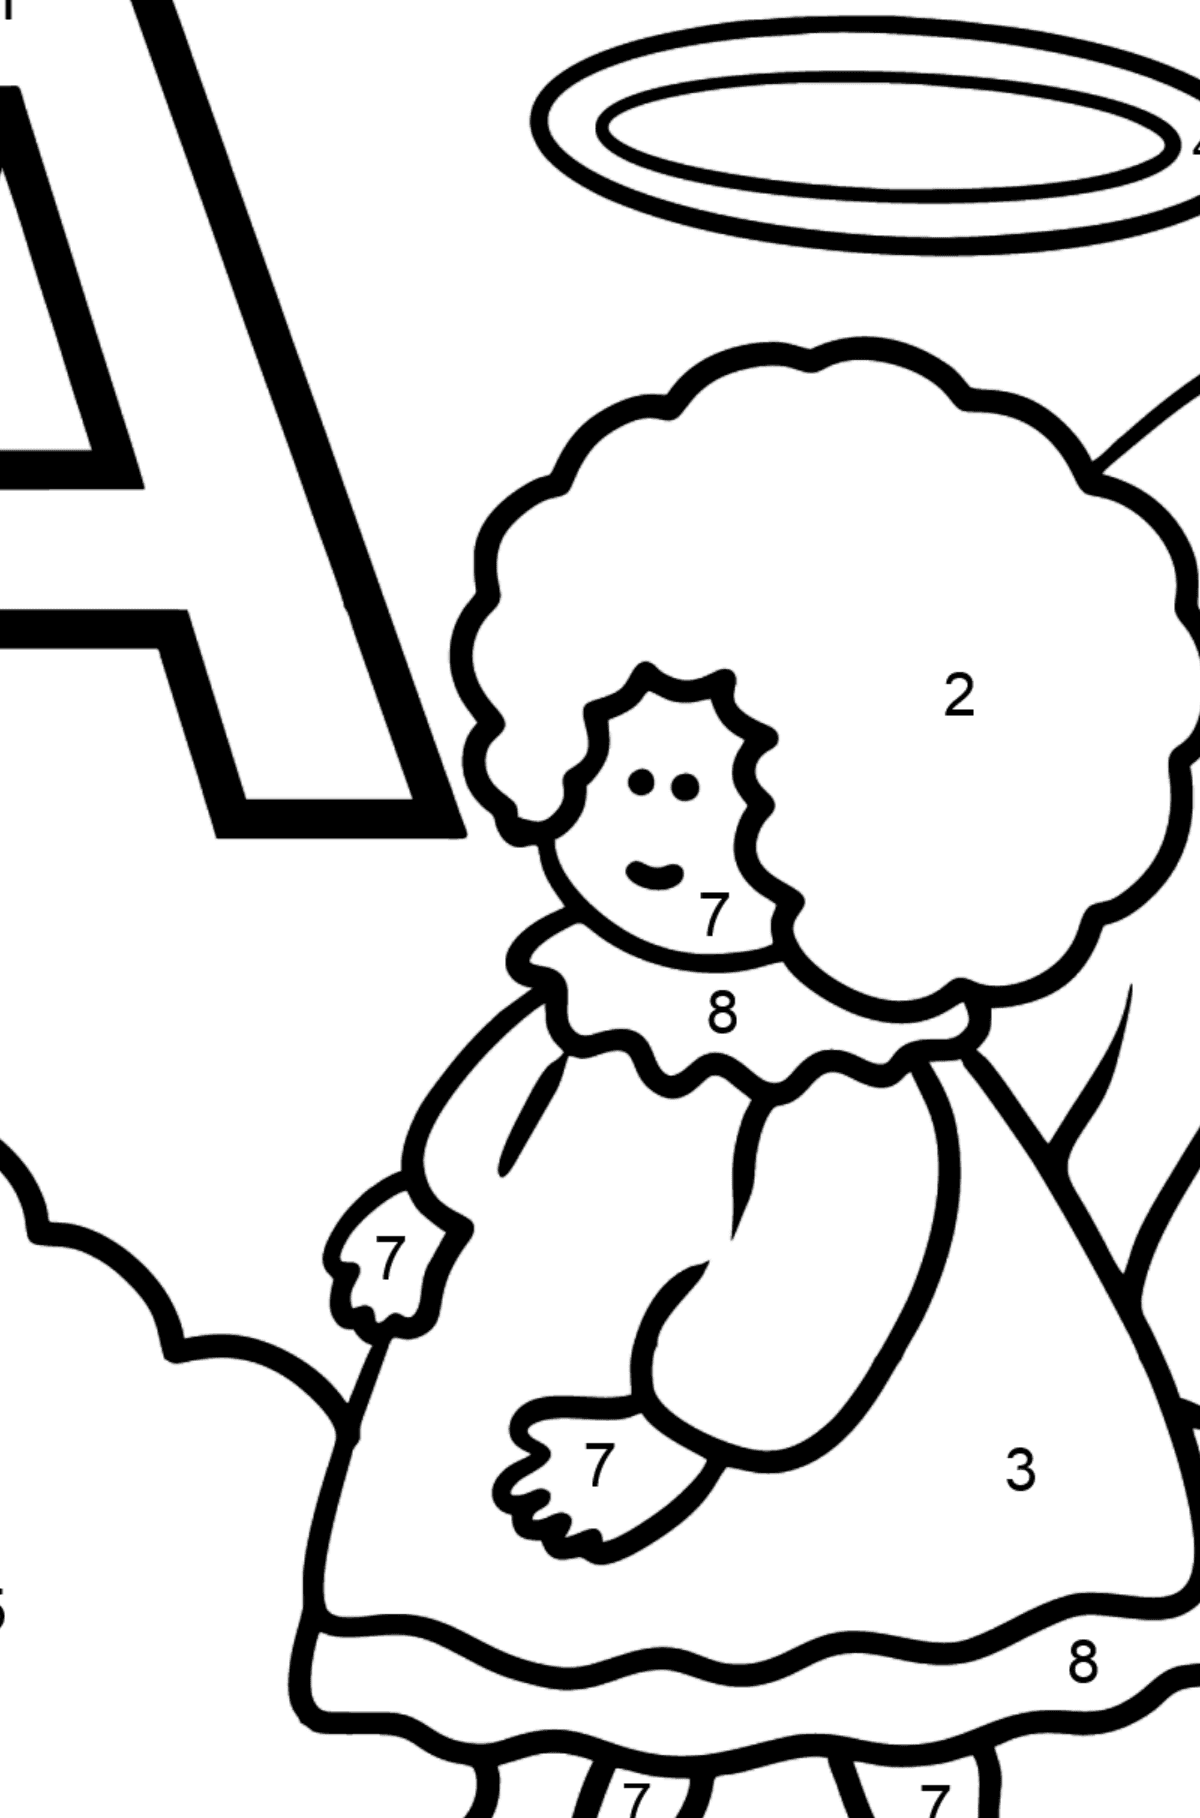 Portuguese Letter A coloring pages - ANJO - Coloring by Numbers for Kids